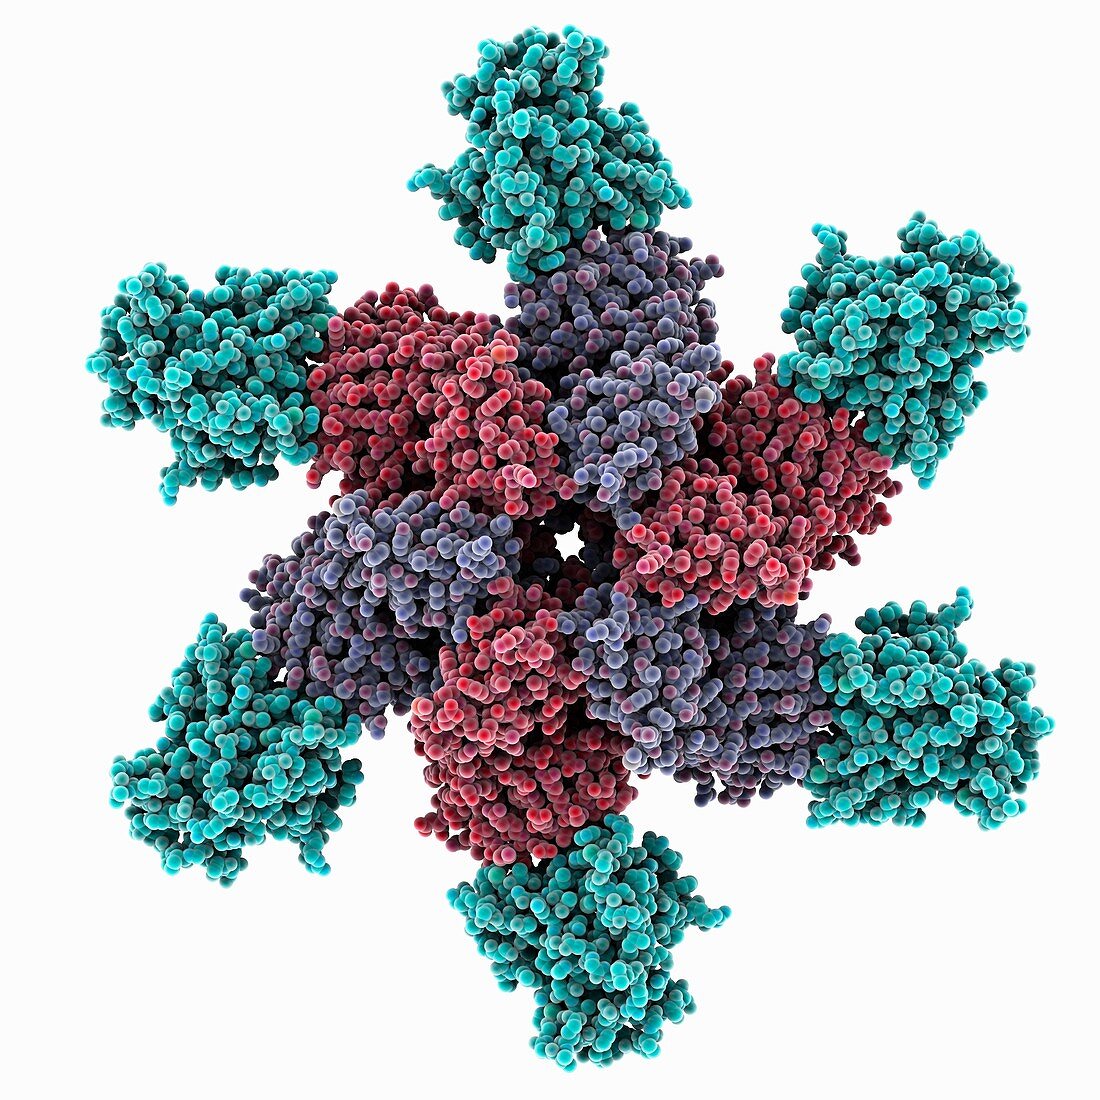 Oncoprotein and p53 complex, molecular model